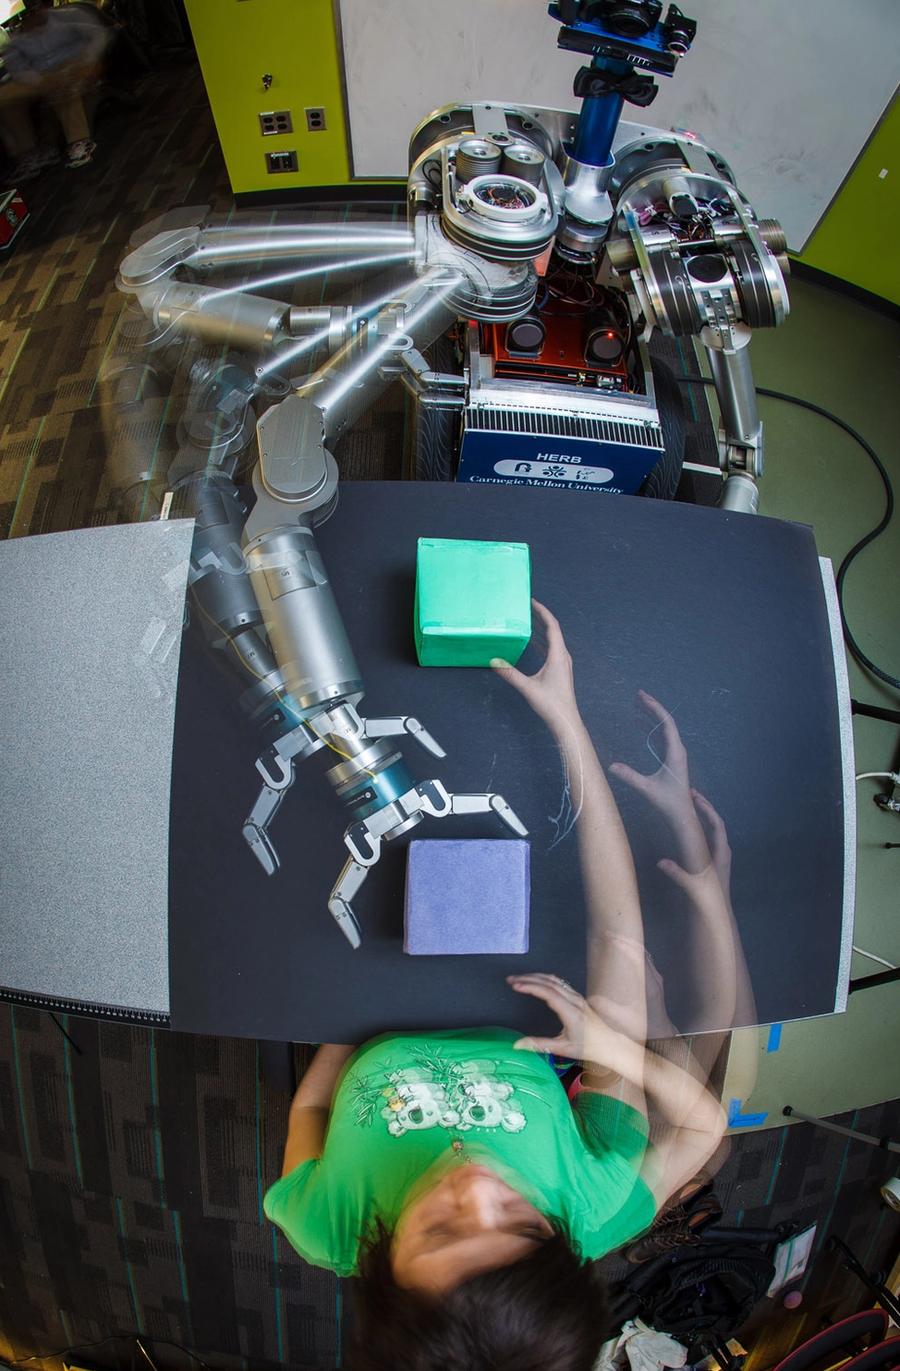 Overhead photograph uses multiple exposures to show the robot and a person sitting across a table from each other. They each reach toward a colored cube in front of each of them, and appear to be mirroring their actions.